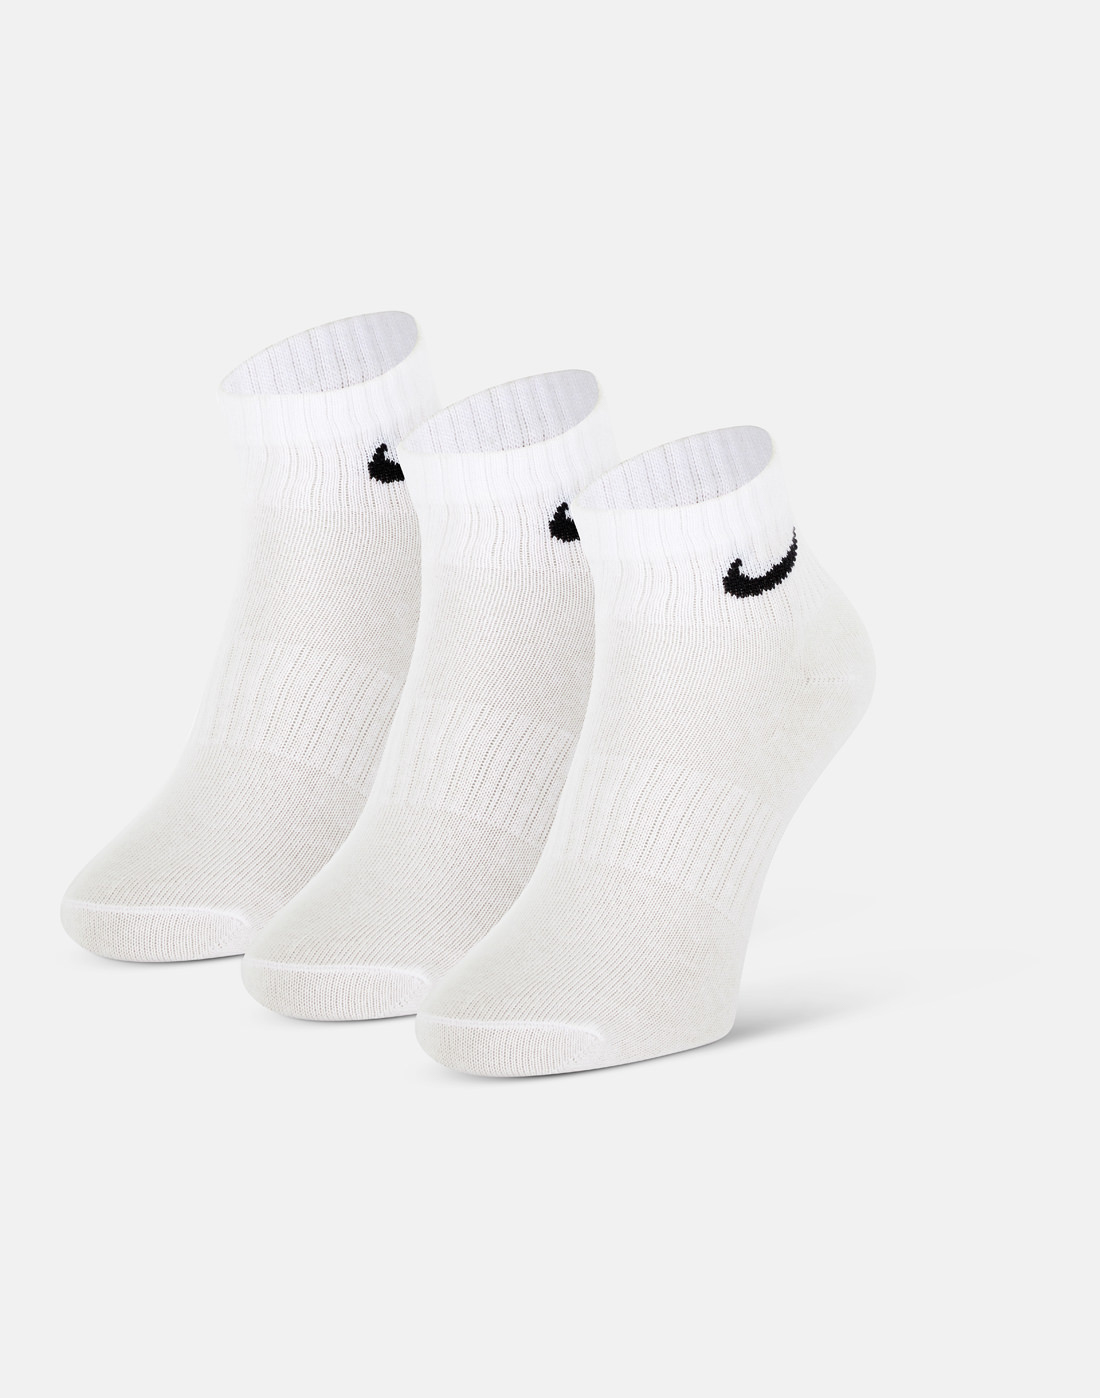 Nike Everyday Ankle 3 Pack Socks - White | Life Style Sports IE